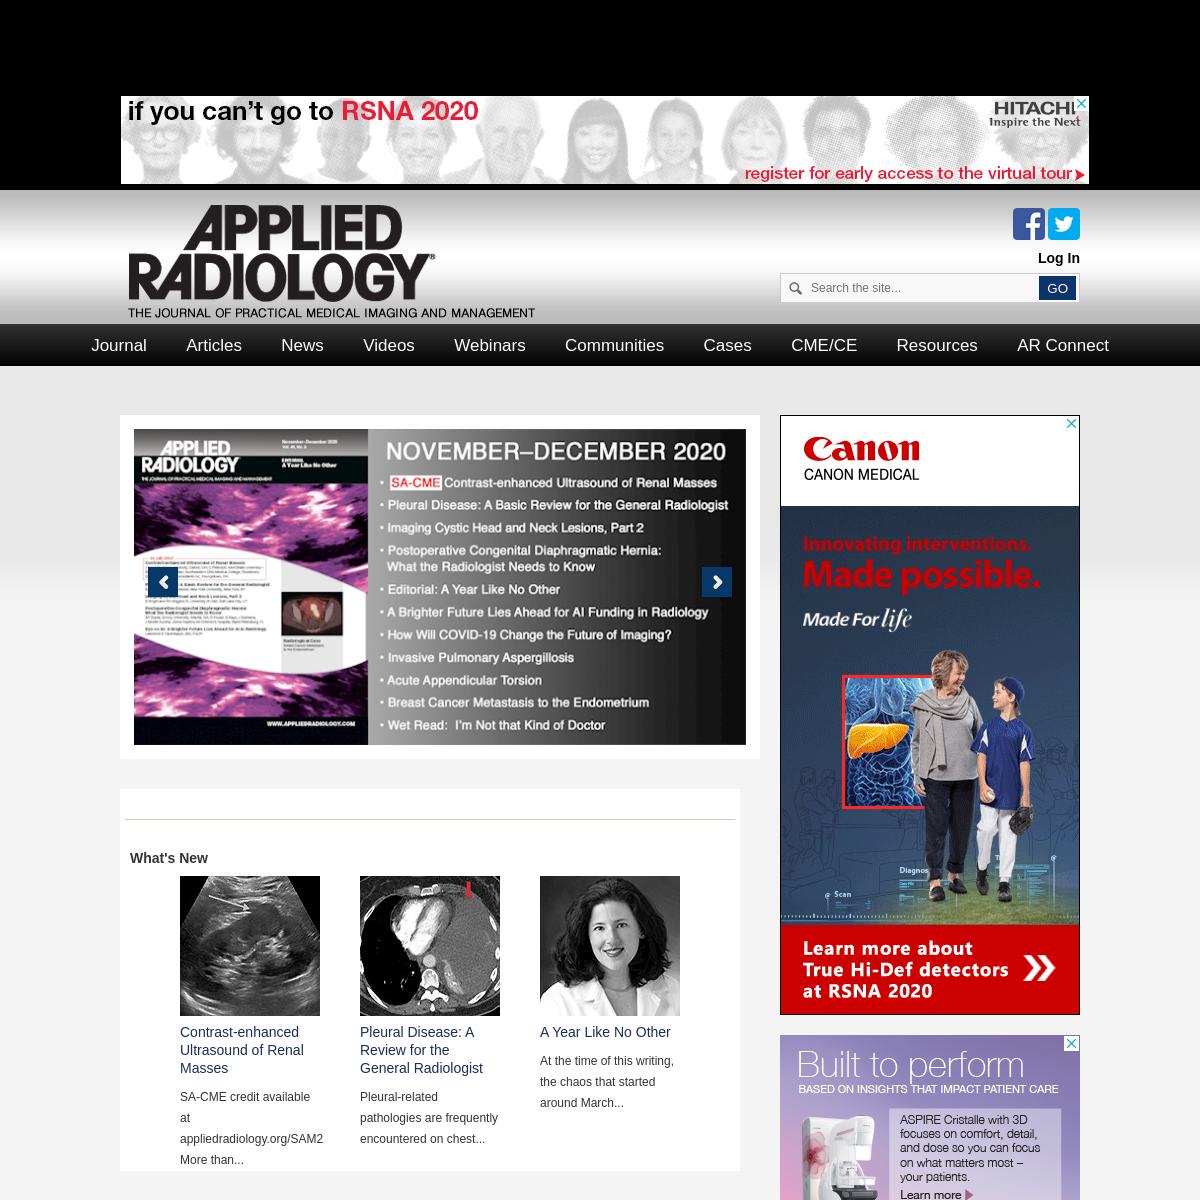 A complete backup of appliedradiology.com